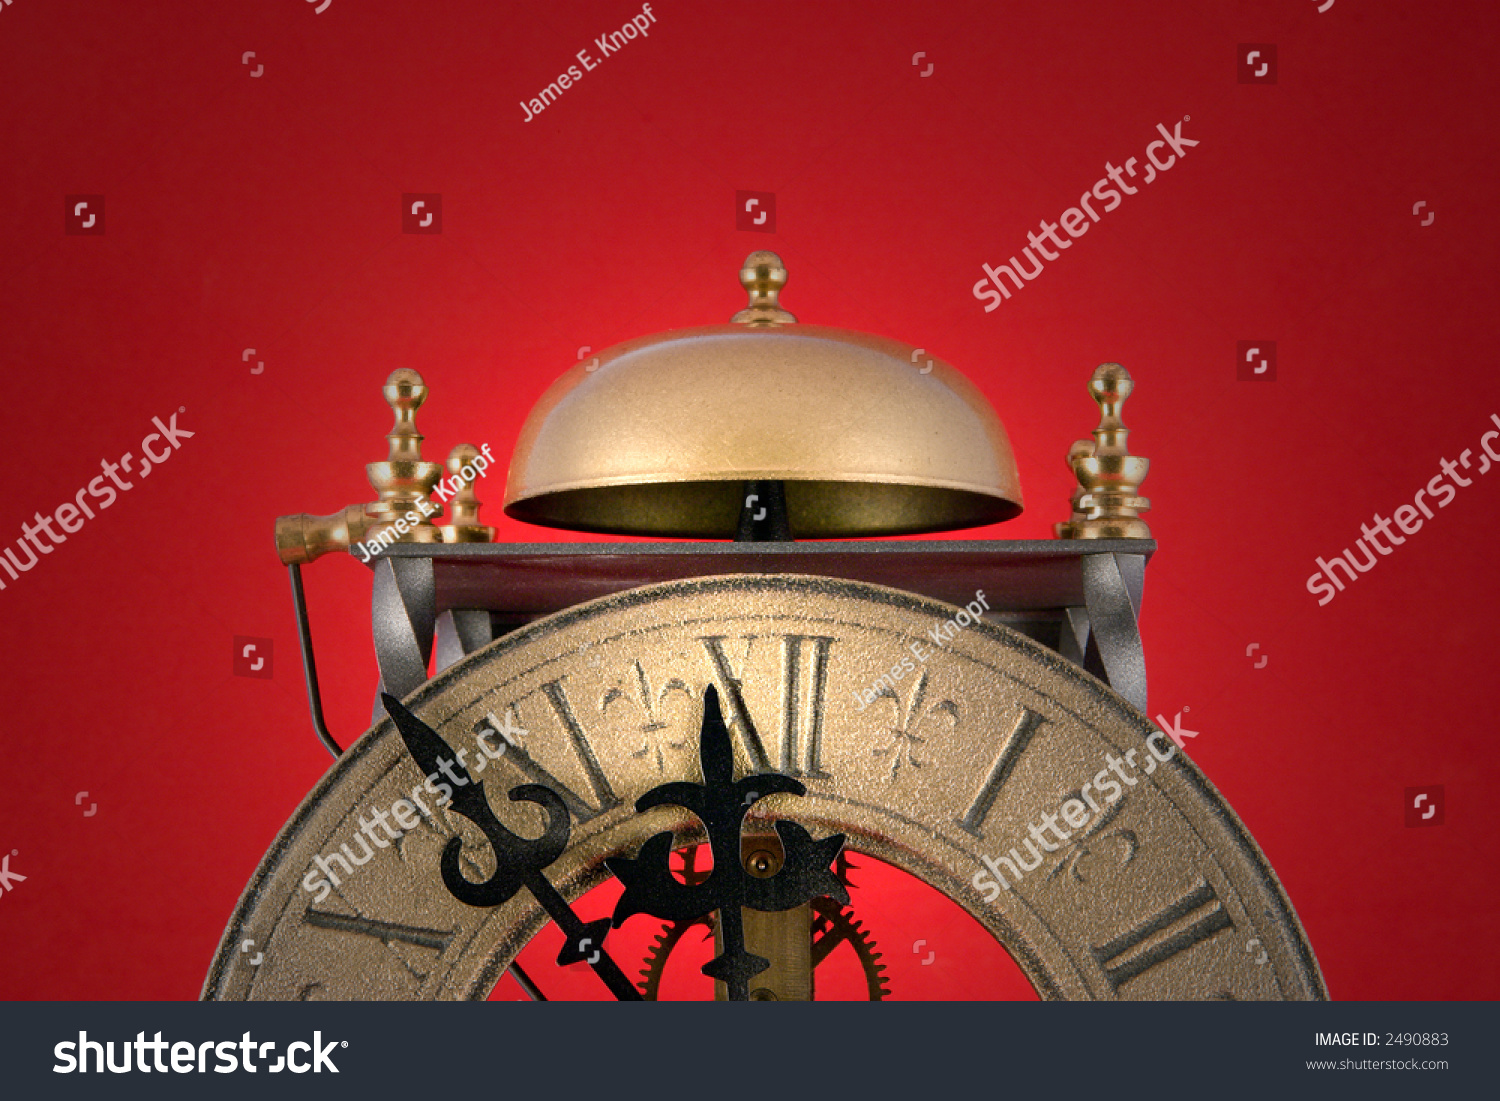 Doomsday Clock At Its Current Setting Of Seven Minutes Until Midnight. Stock Photo ...